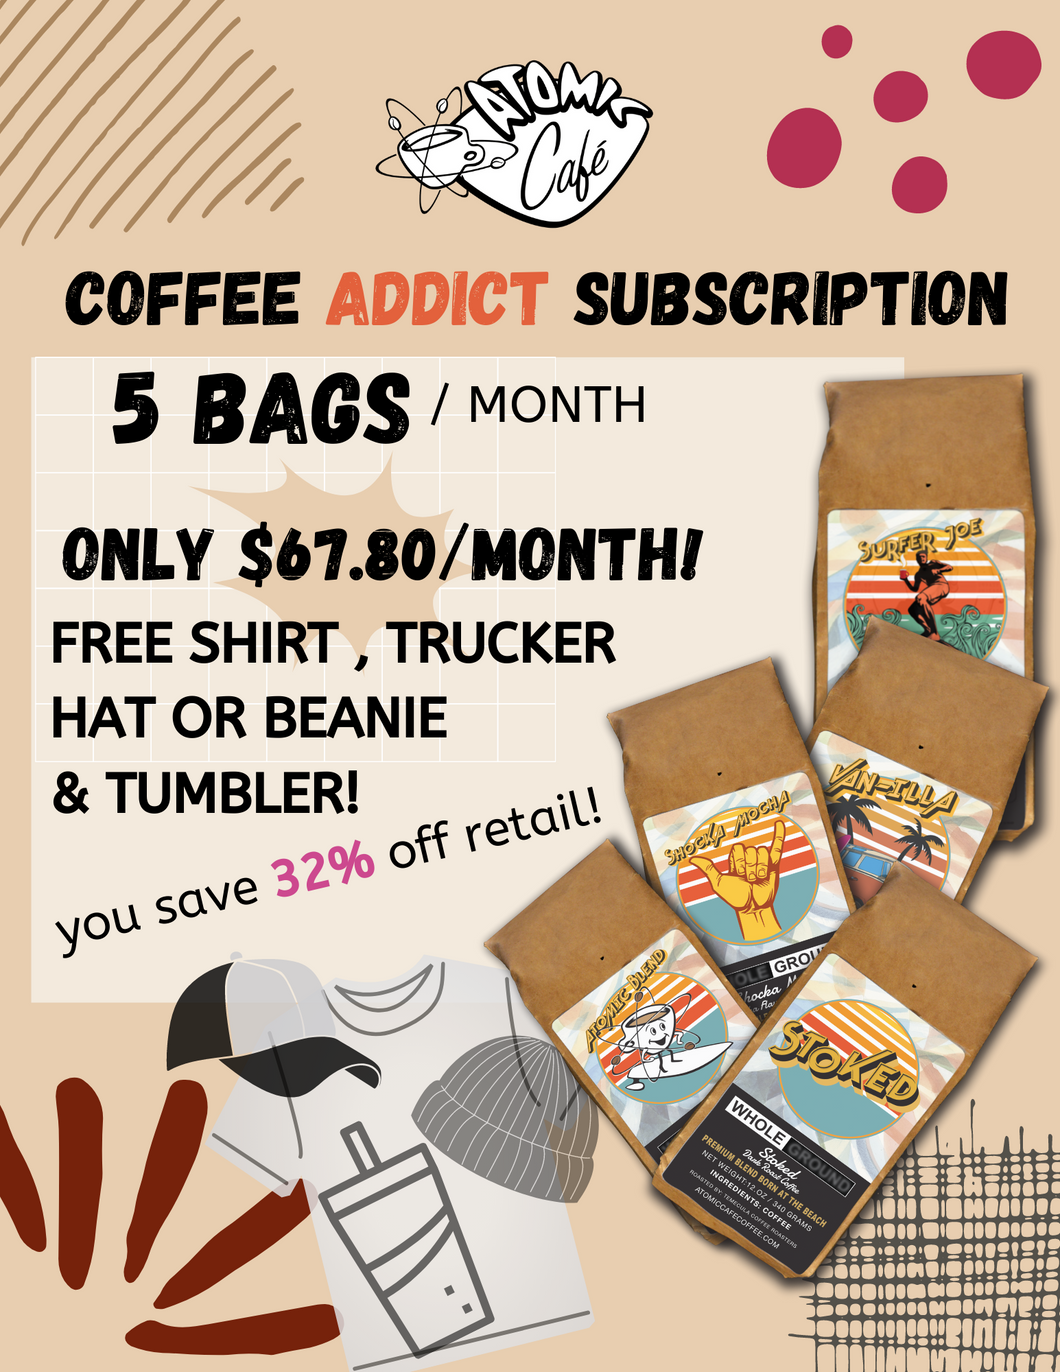 COFFEE ADDICT SUBSCRIPTION - 5 bags/ month (read more)